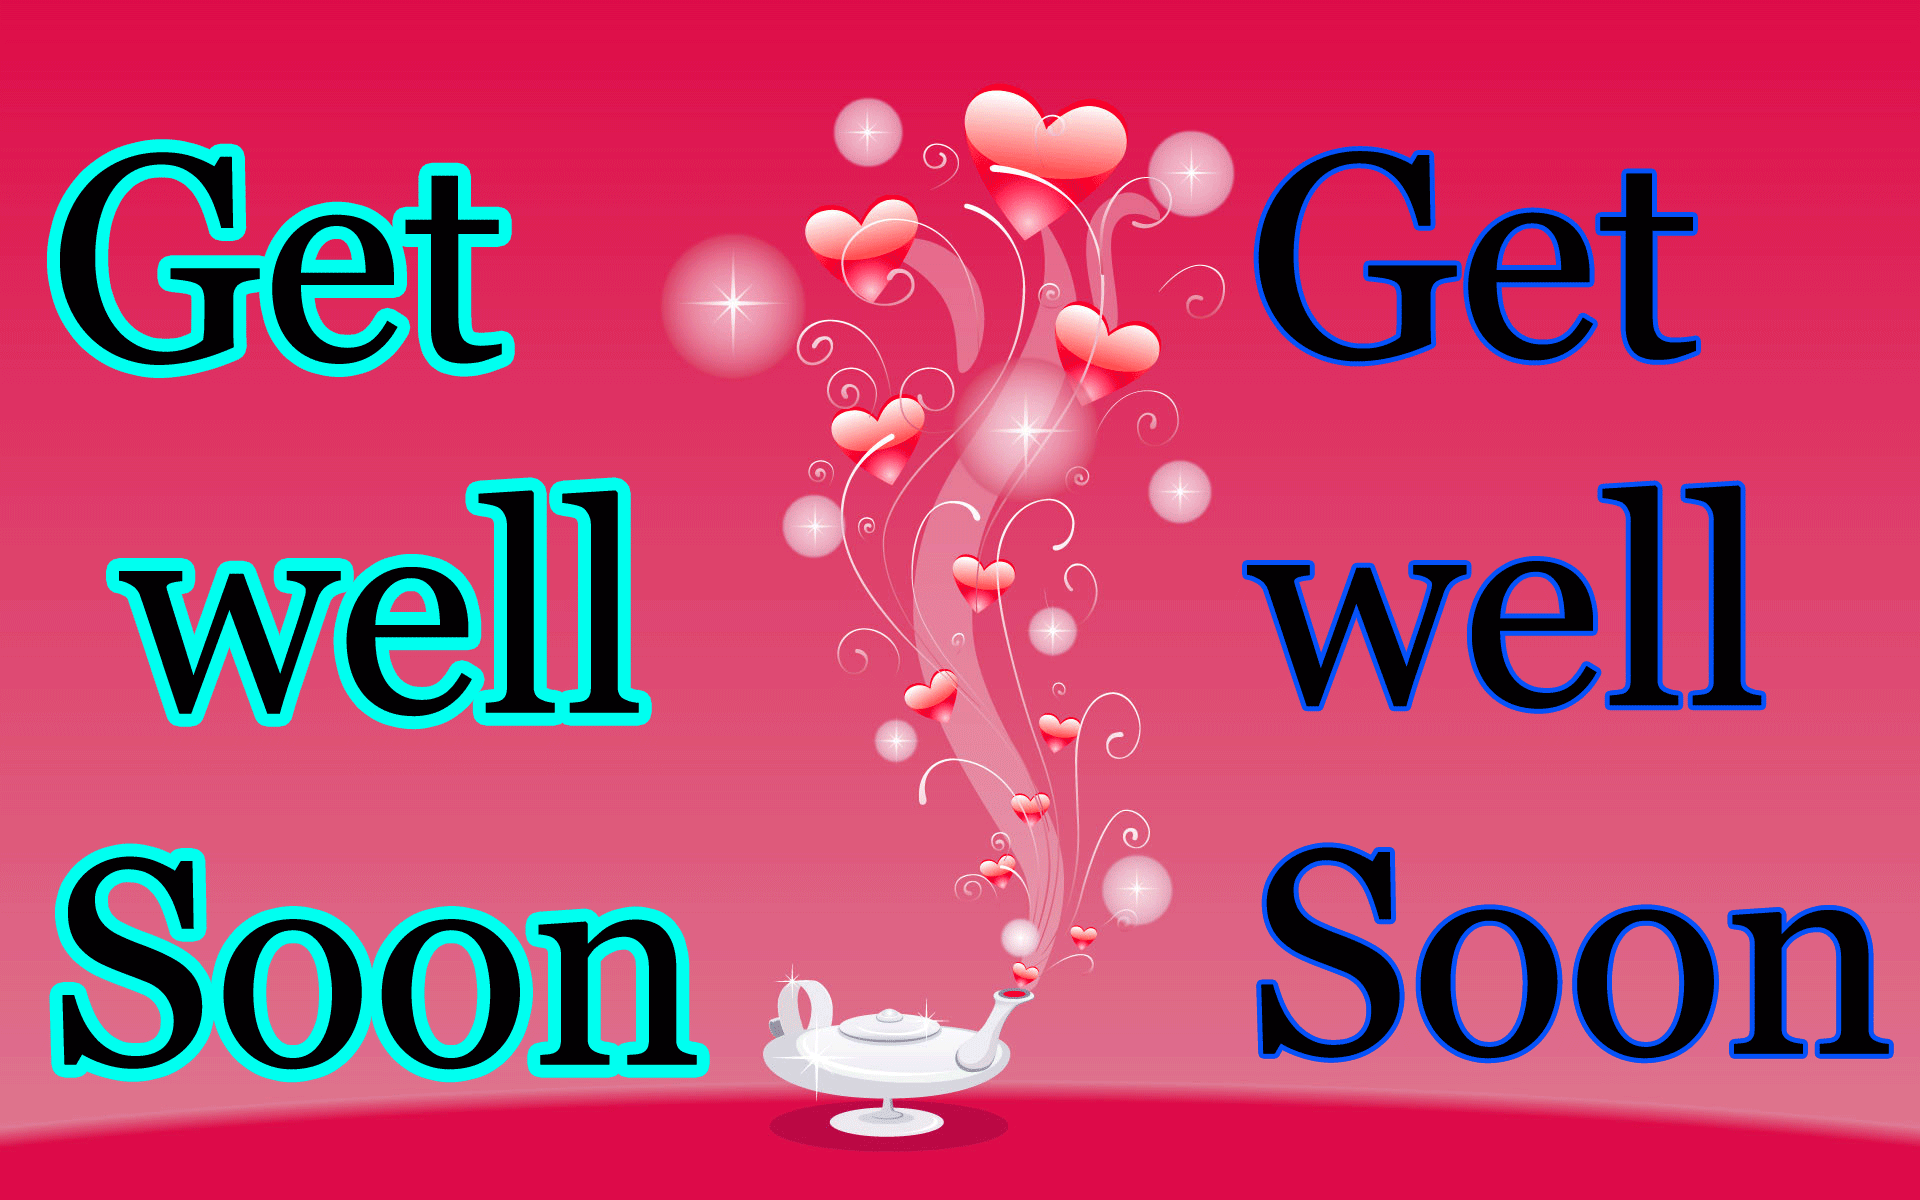 Get Well Soon Image Wallpaper Picture Pics Download